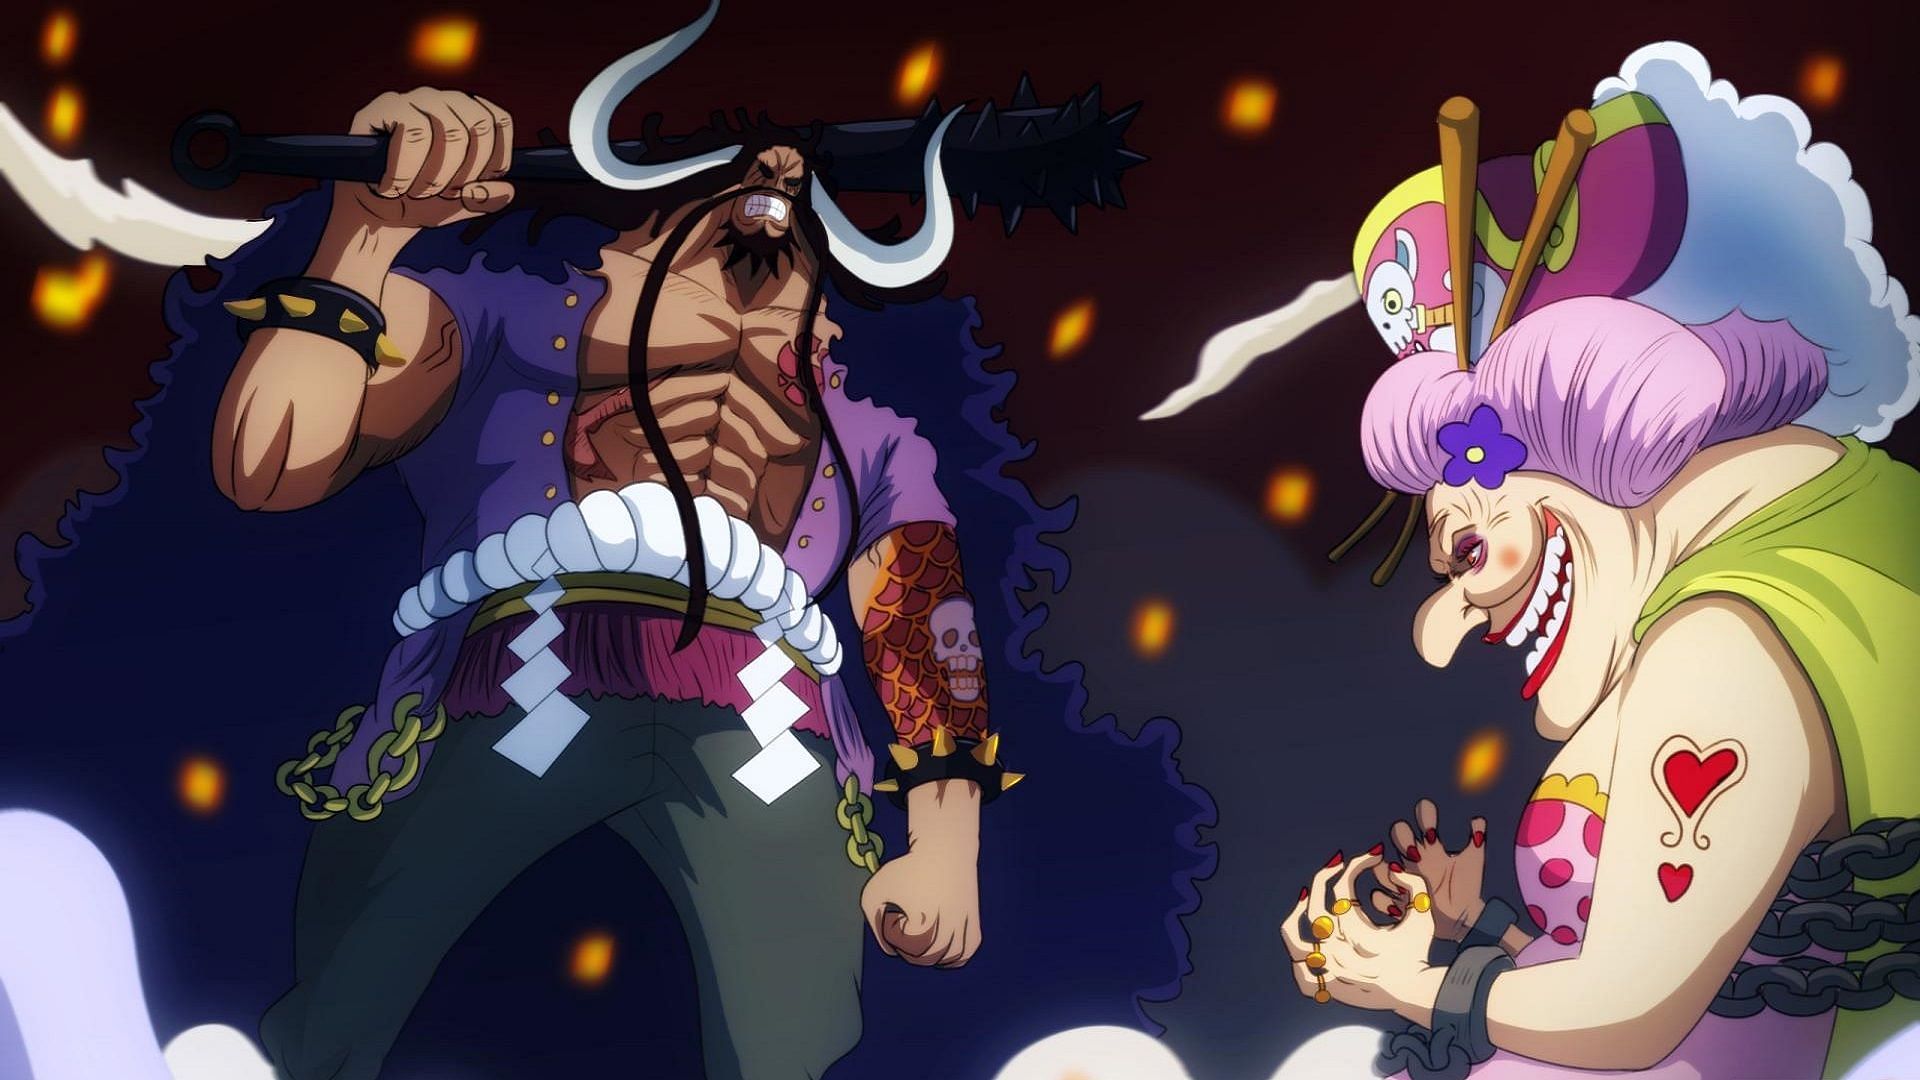 Fans haven't always been pleased about the way Kaido and Big Mom have been handled during the Wano Arc (Image via Eiichiro Oda/Shueisha, One Piece)